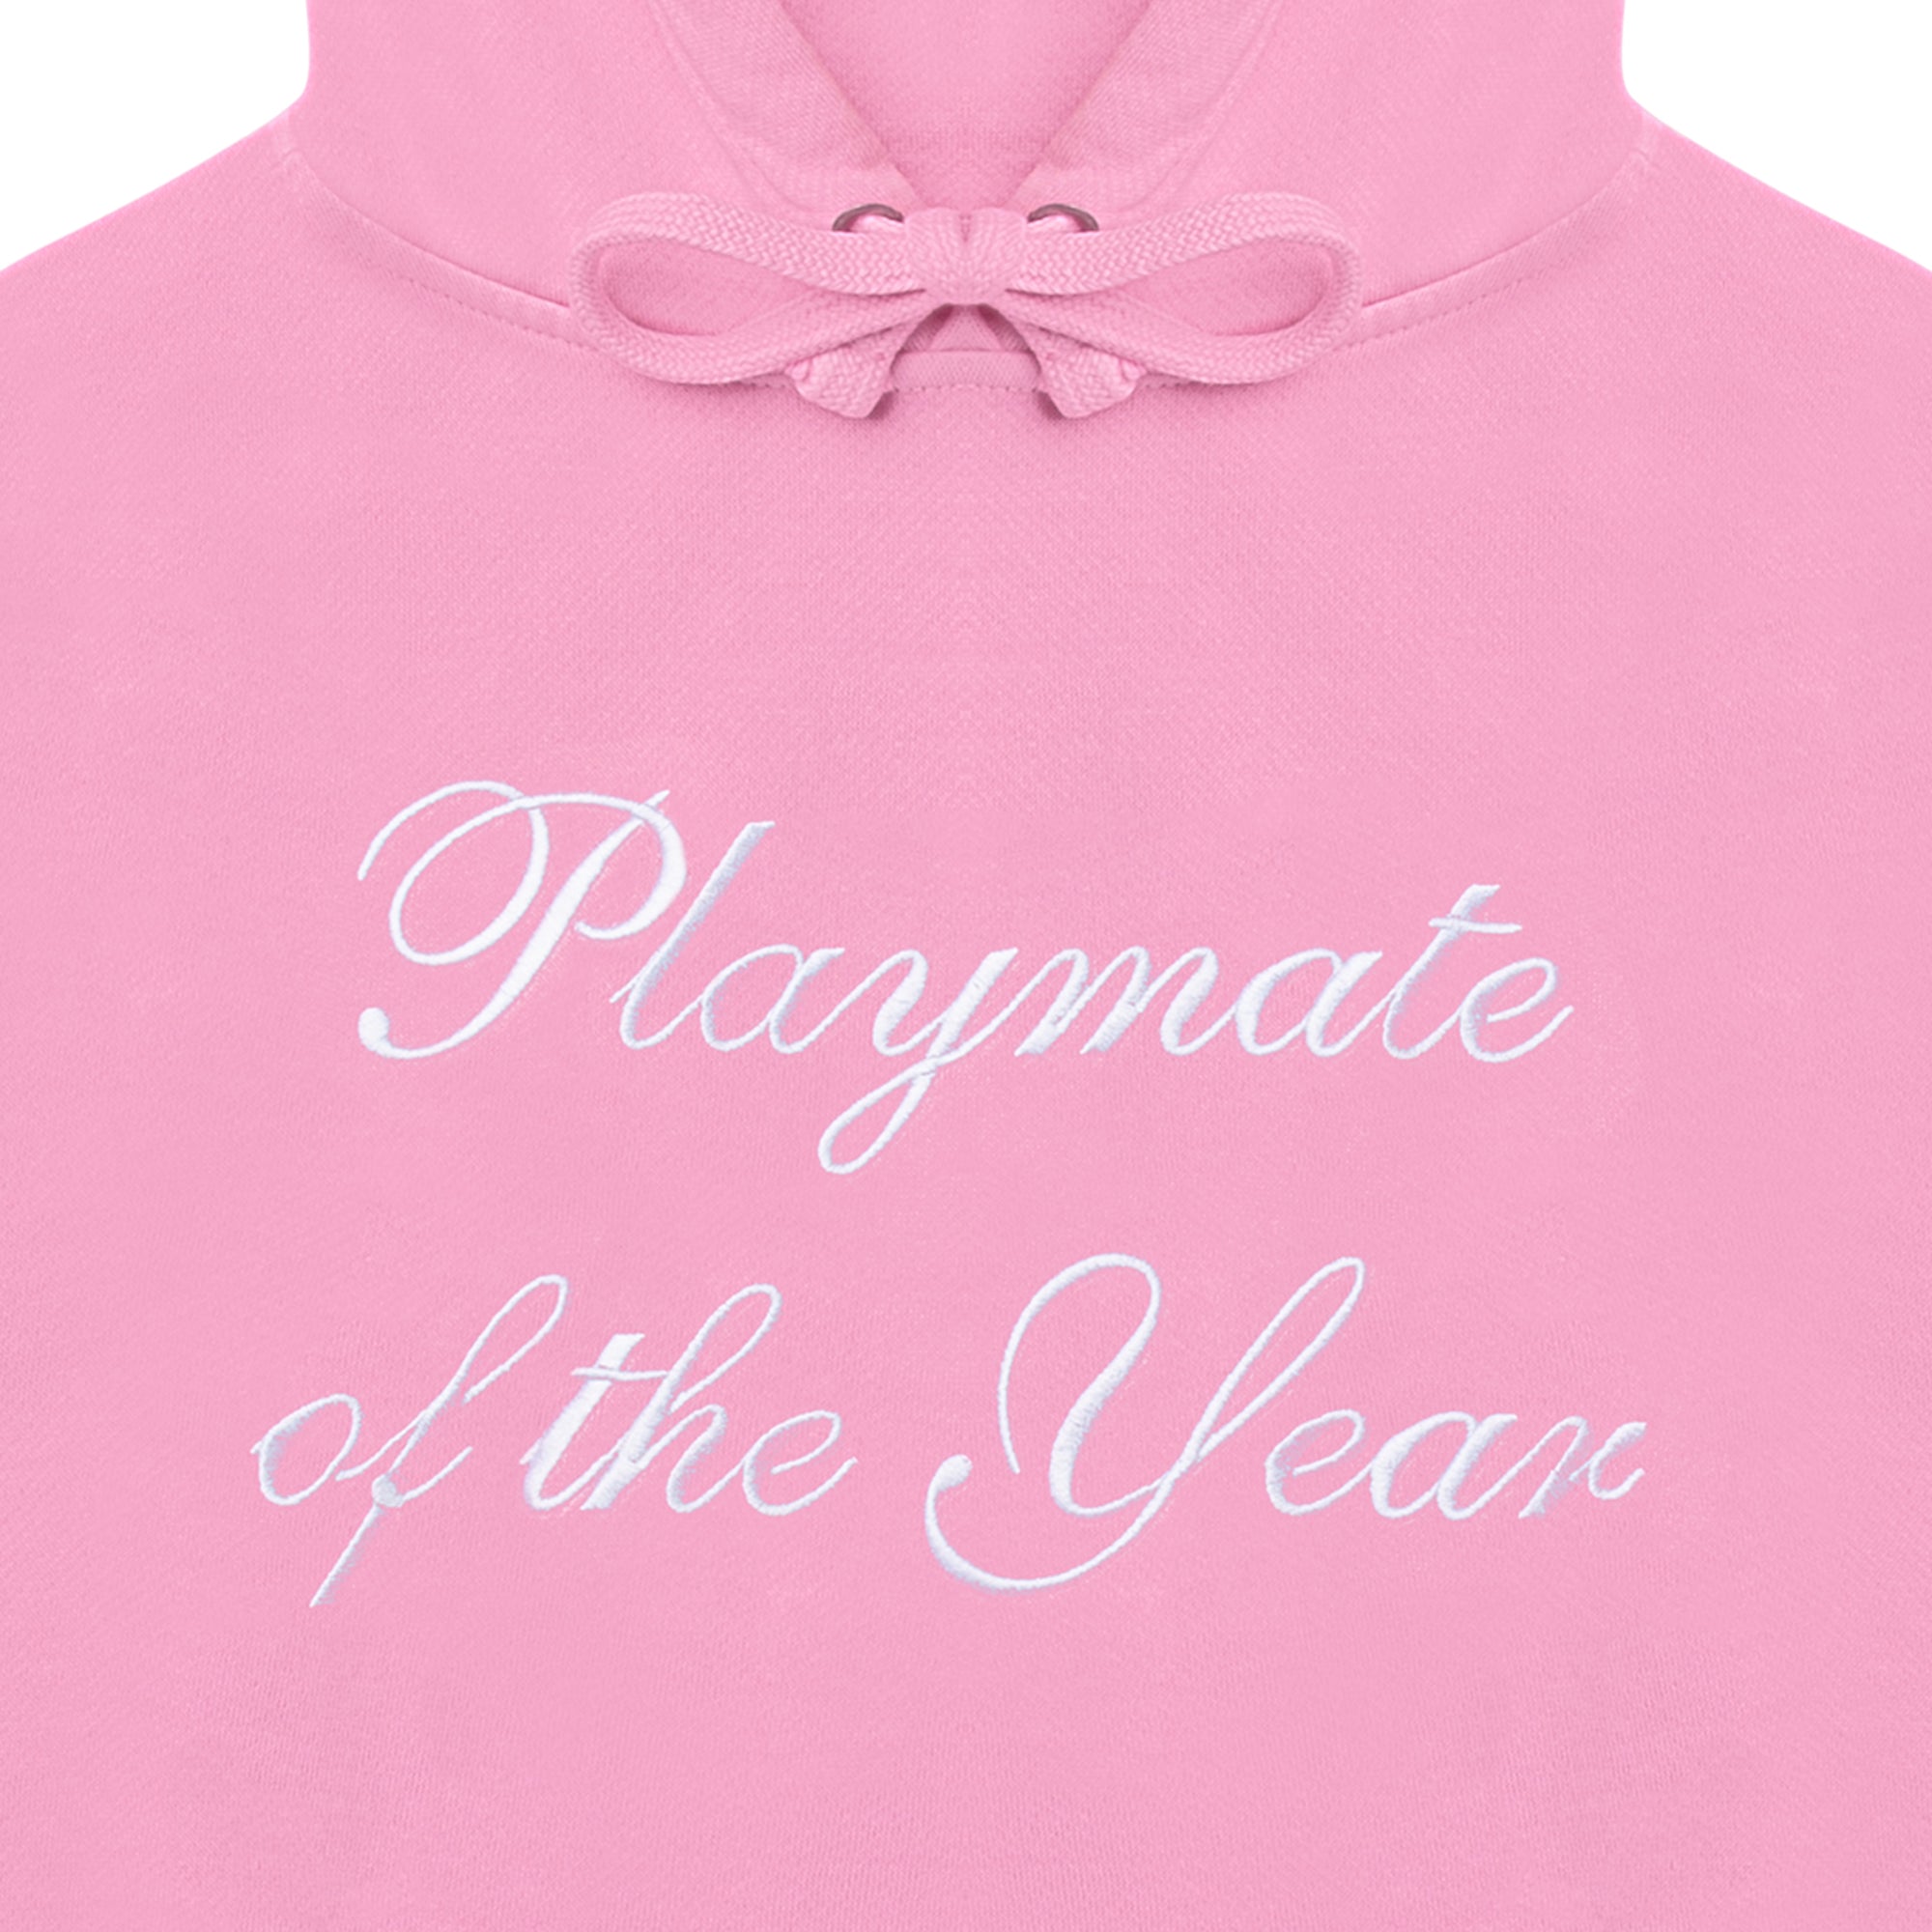 Playmate of the Year Hoodie - Pink / White Print